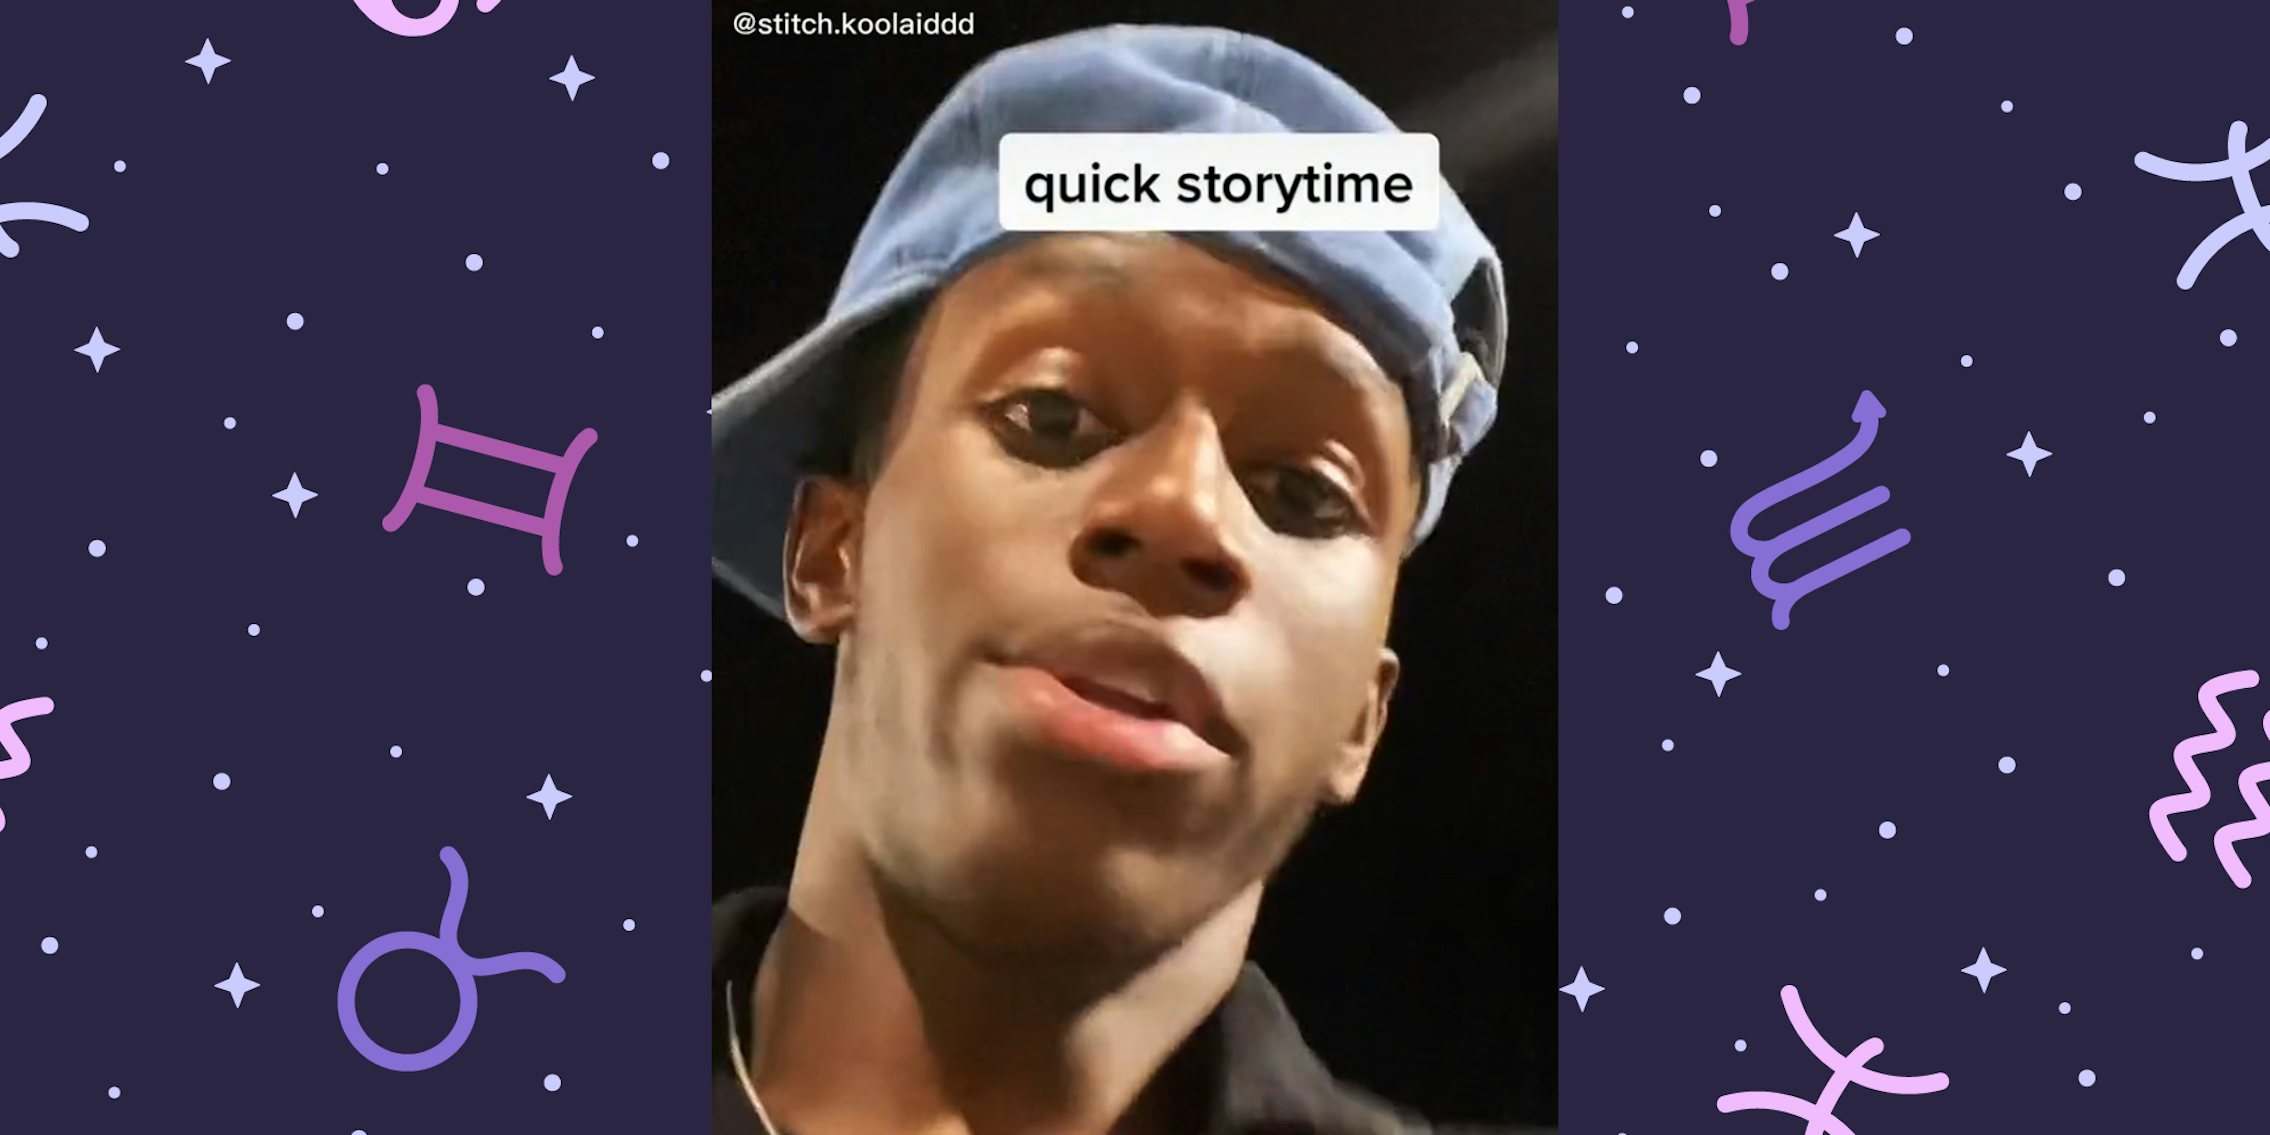 young man with 'quick storytime' inset over astrology symbol background